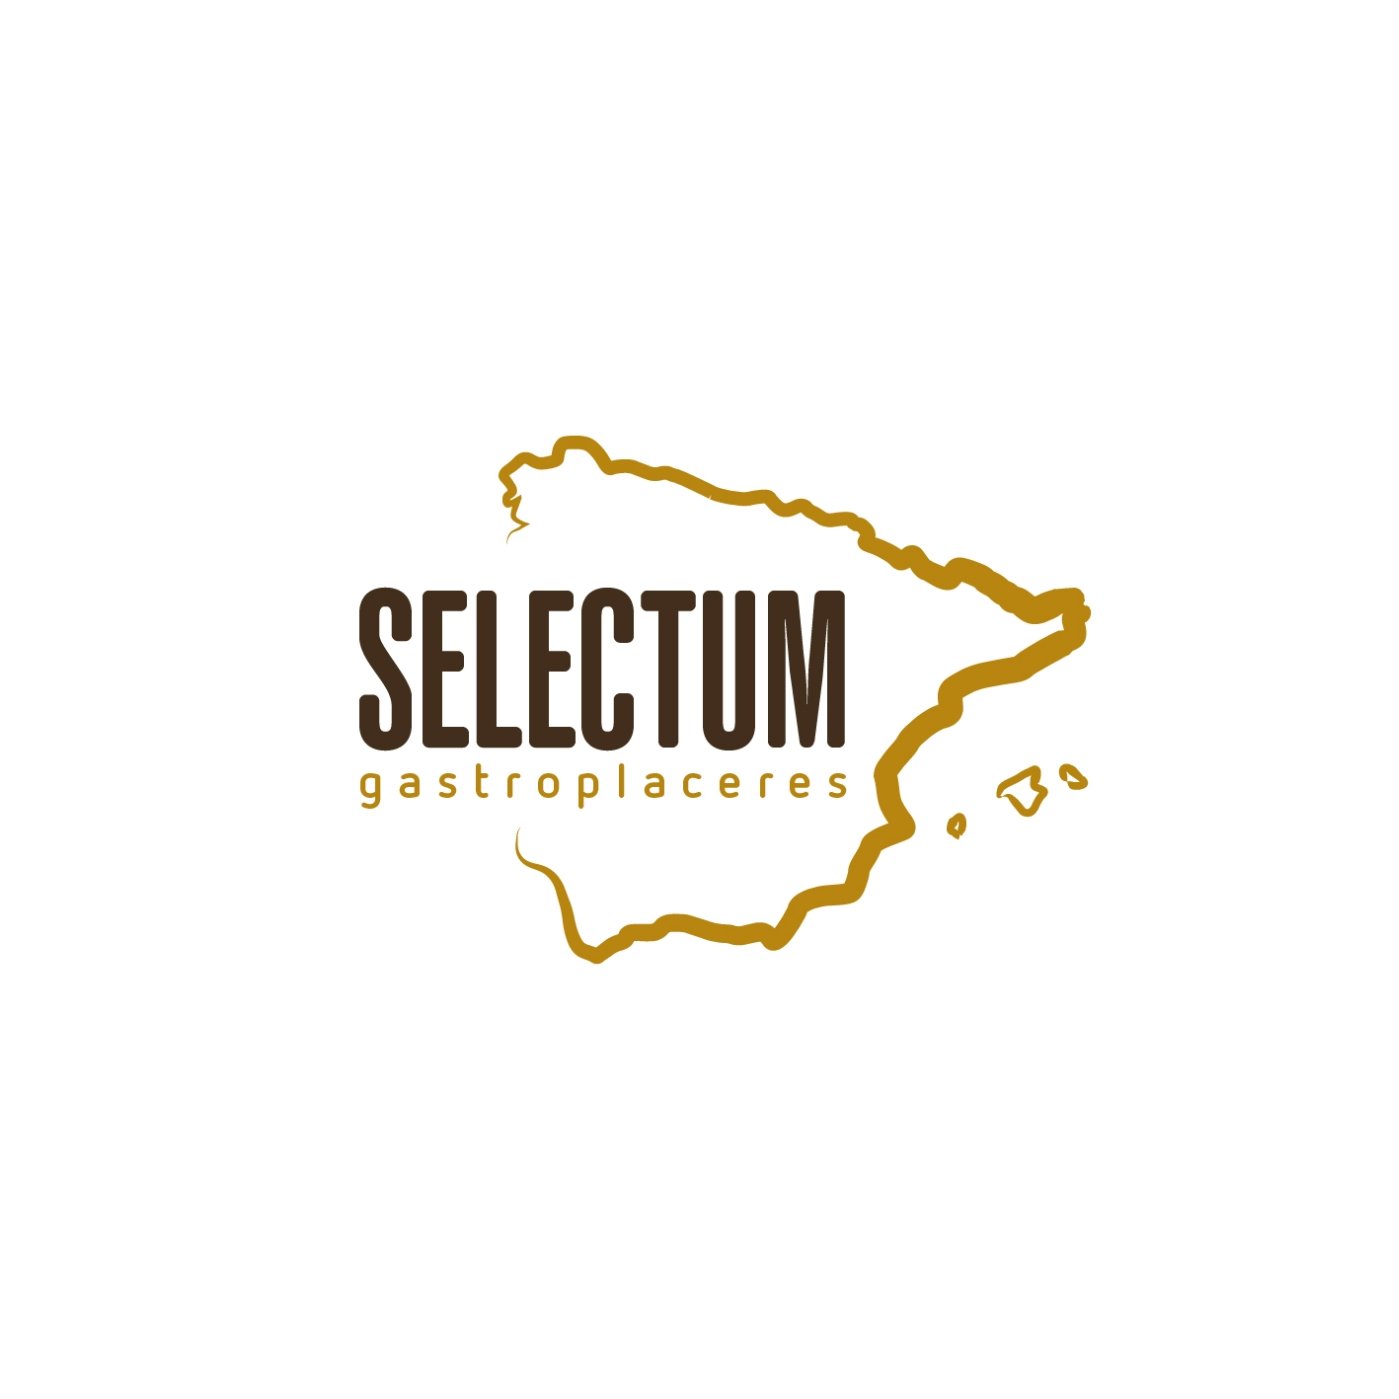 Selectum Gastroplaceres - Gourmet Grocery Store - Madrid - 911 09 65 00 Spain | ShowMeLocal.com